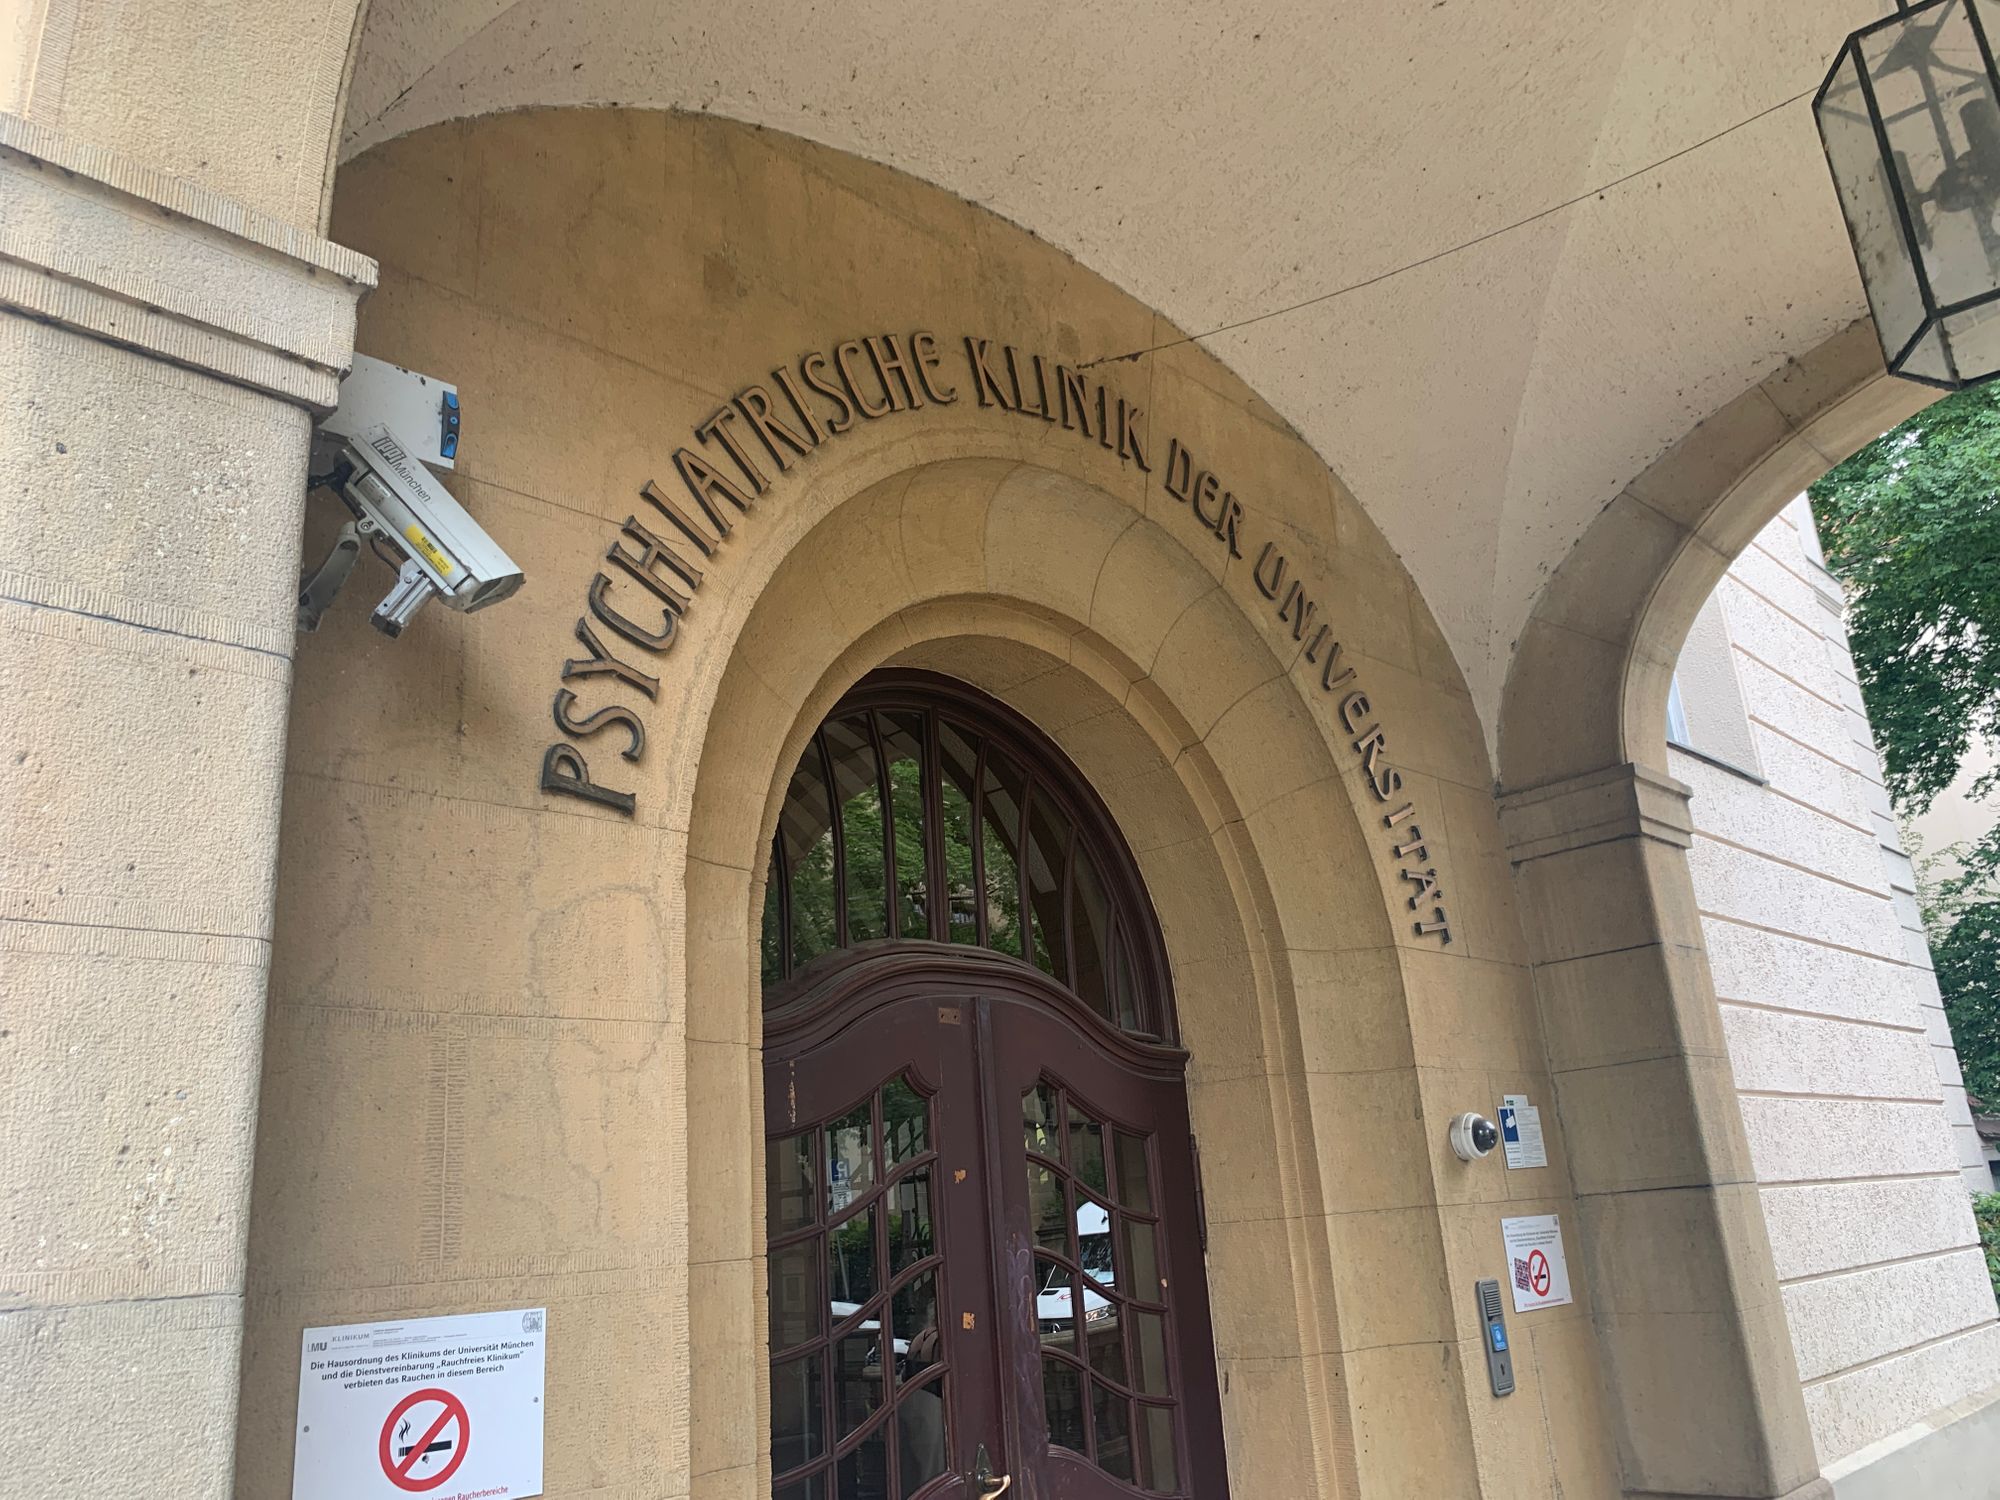 Outside the building where Alois Alzheimer's old lab is. The text above the door means " University Psychiatric clinic